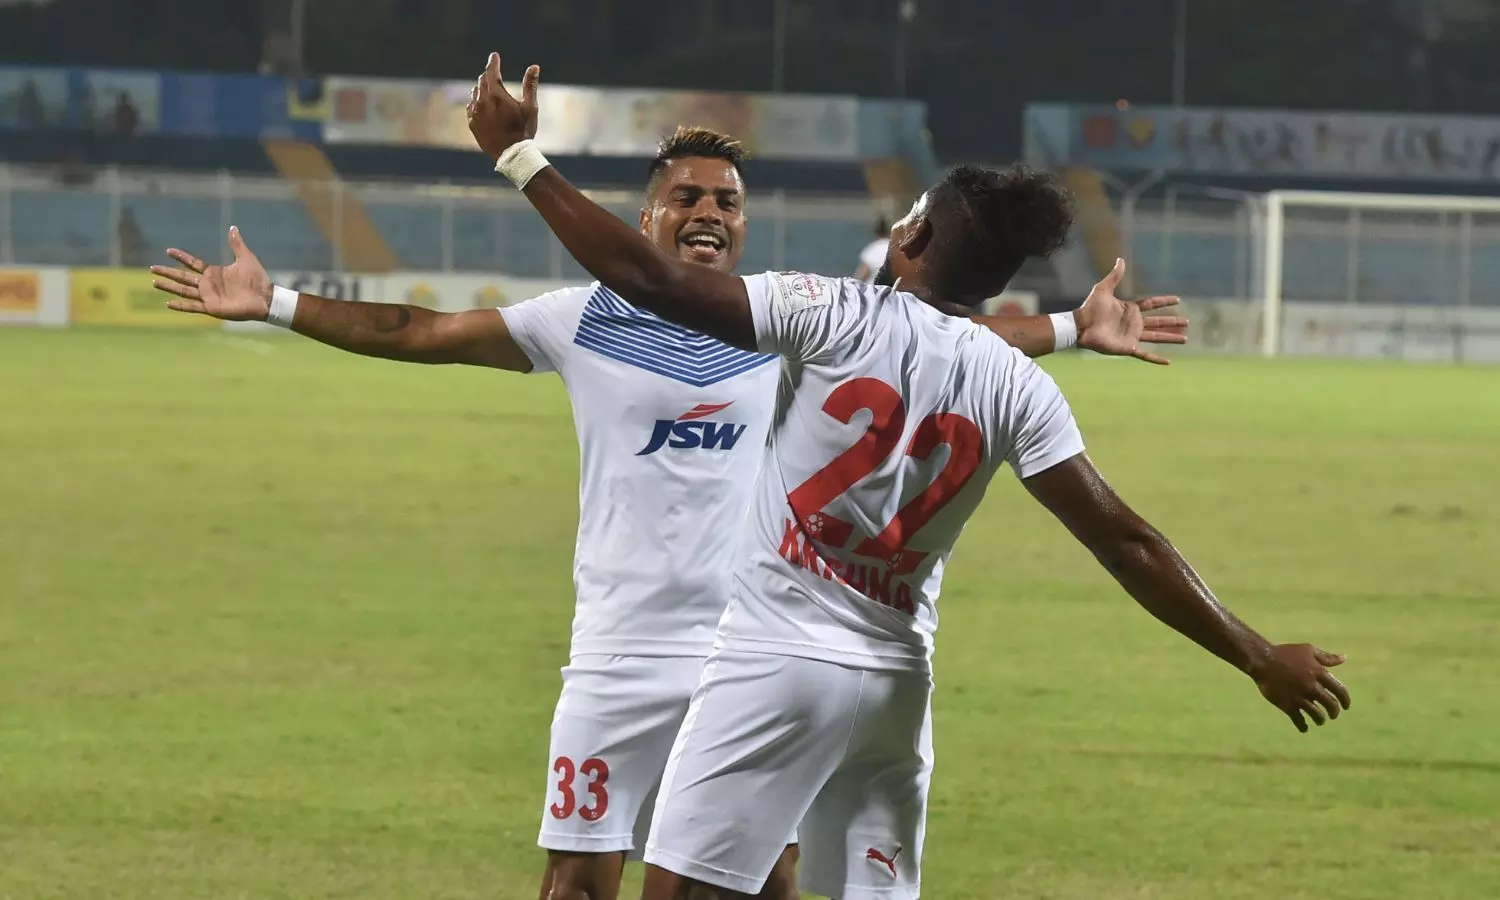 Durand Cup 2022 LIVE Bengaluru FC wins 4-0 against Indian Air Force- Updates, Scores, Results,